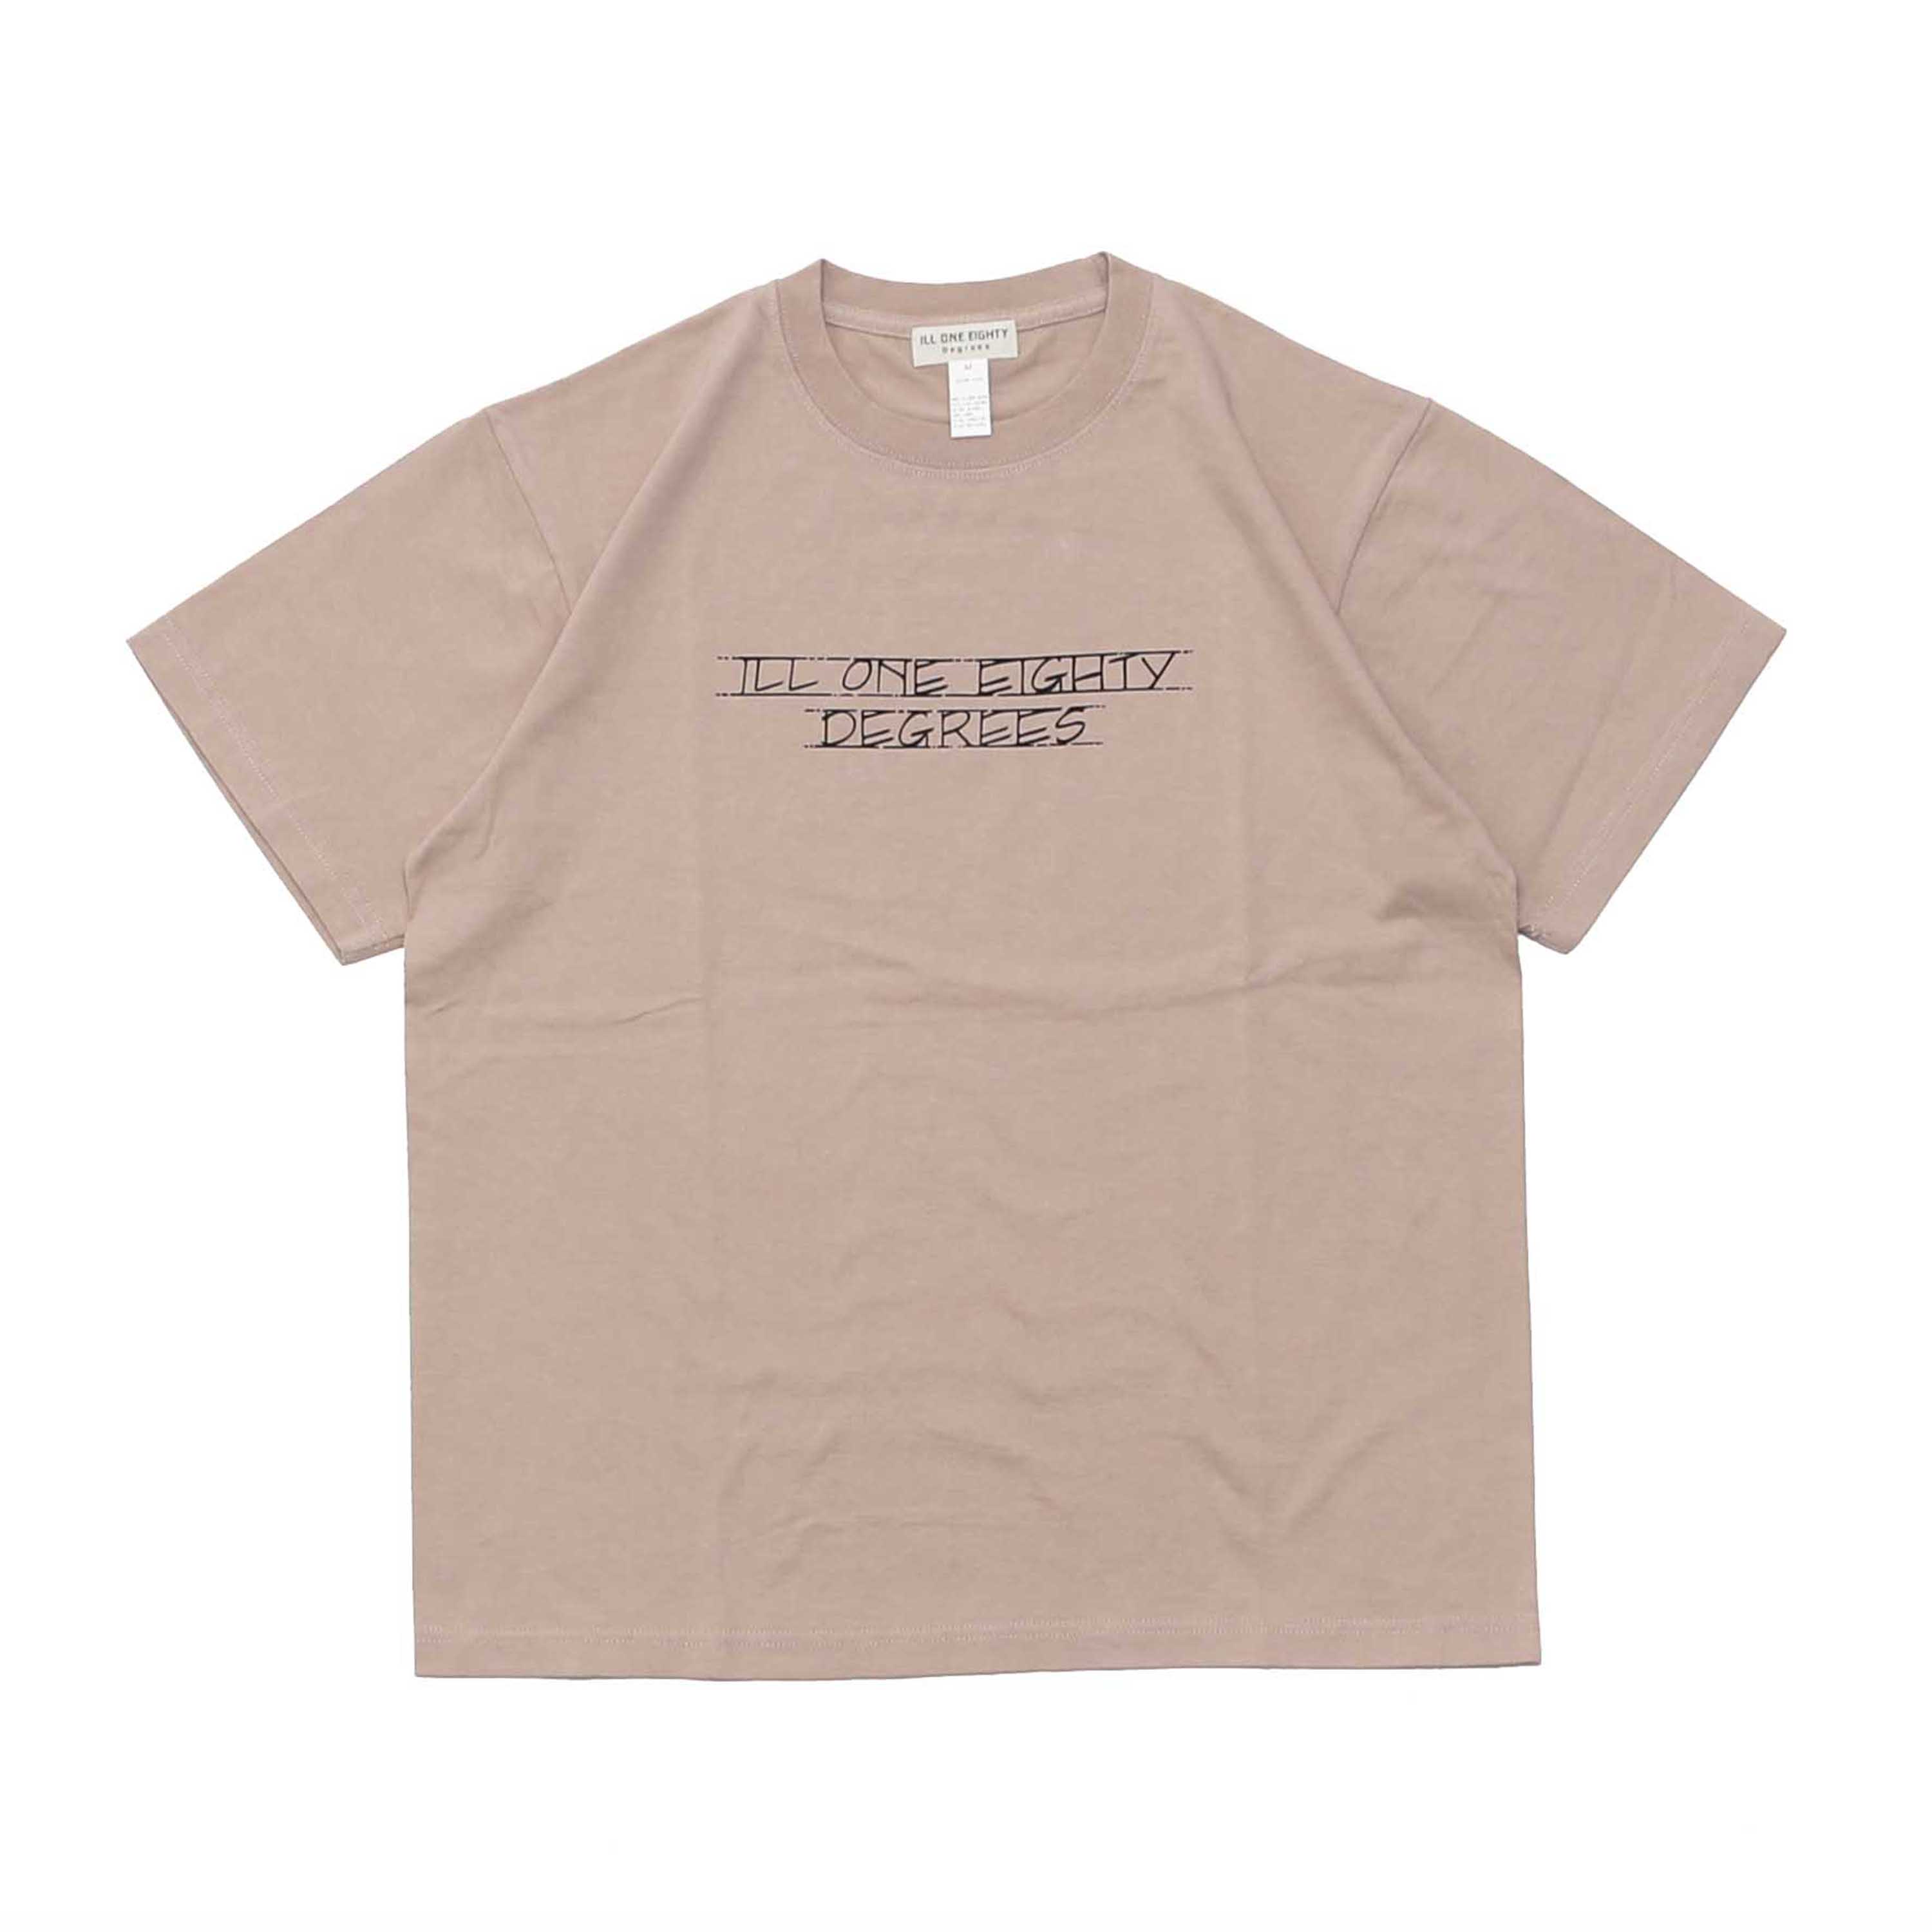 ILL ONE EIGHT S/S TEE - S.PINK